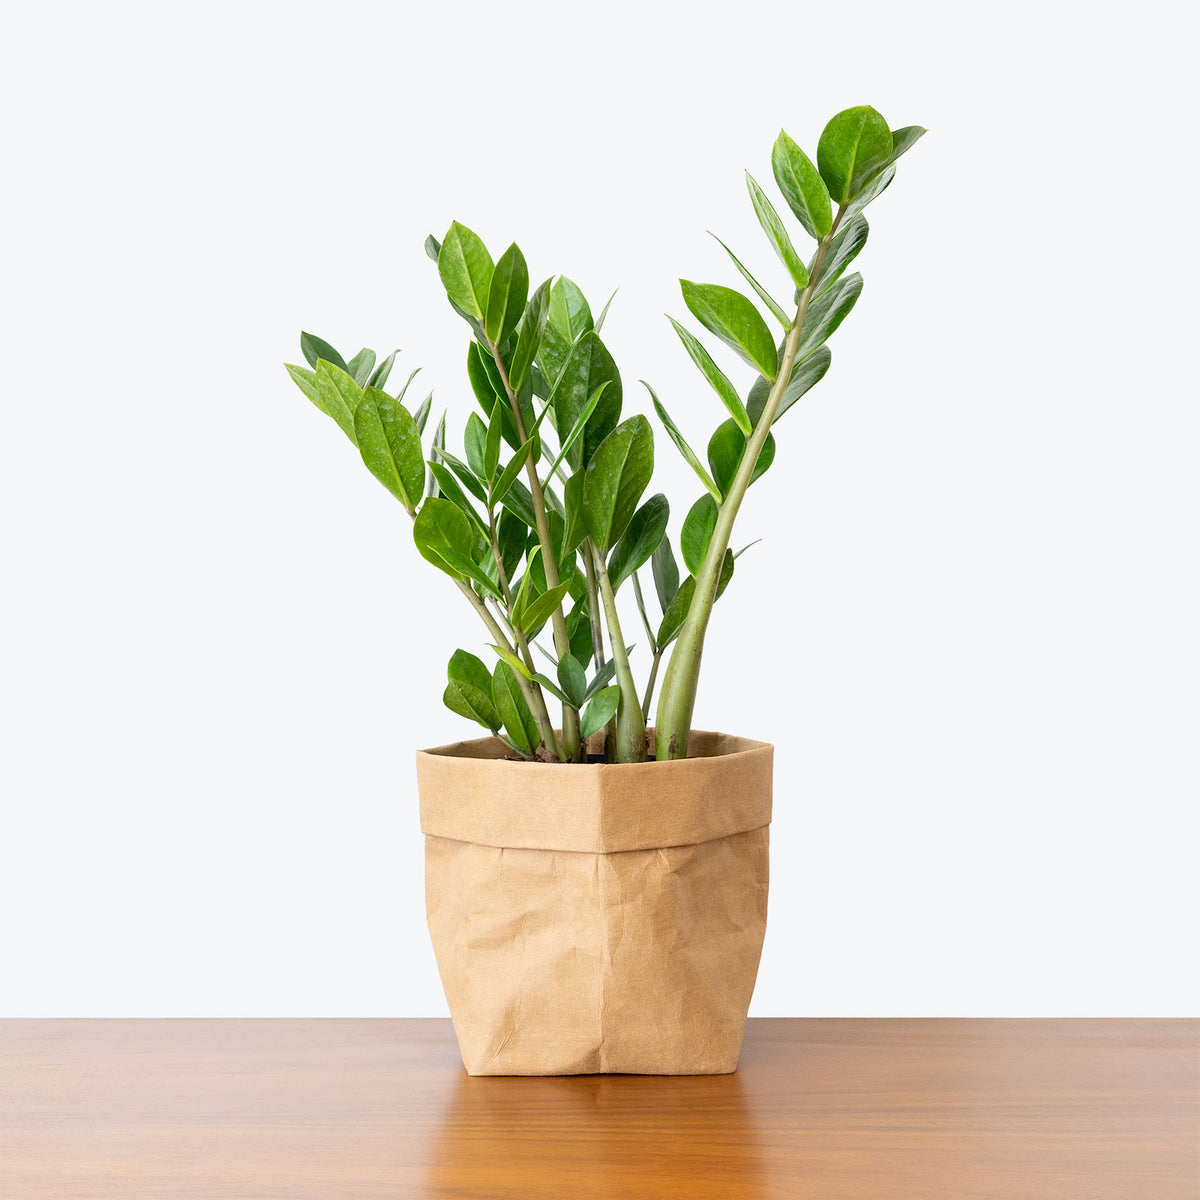 ZZ Plant - Top 10 Best Indoor House Plants for Your Home - House Plants Delivery Toronto - JOMO Studio